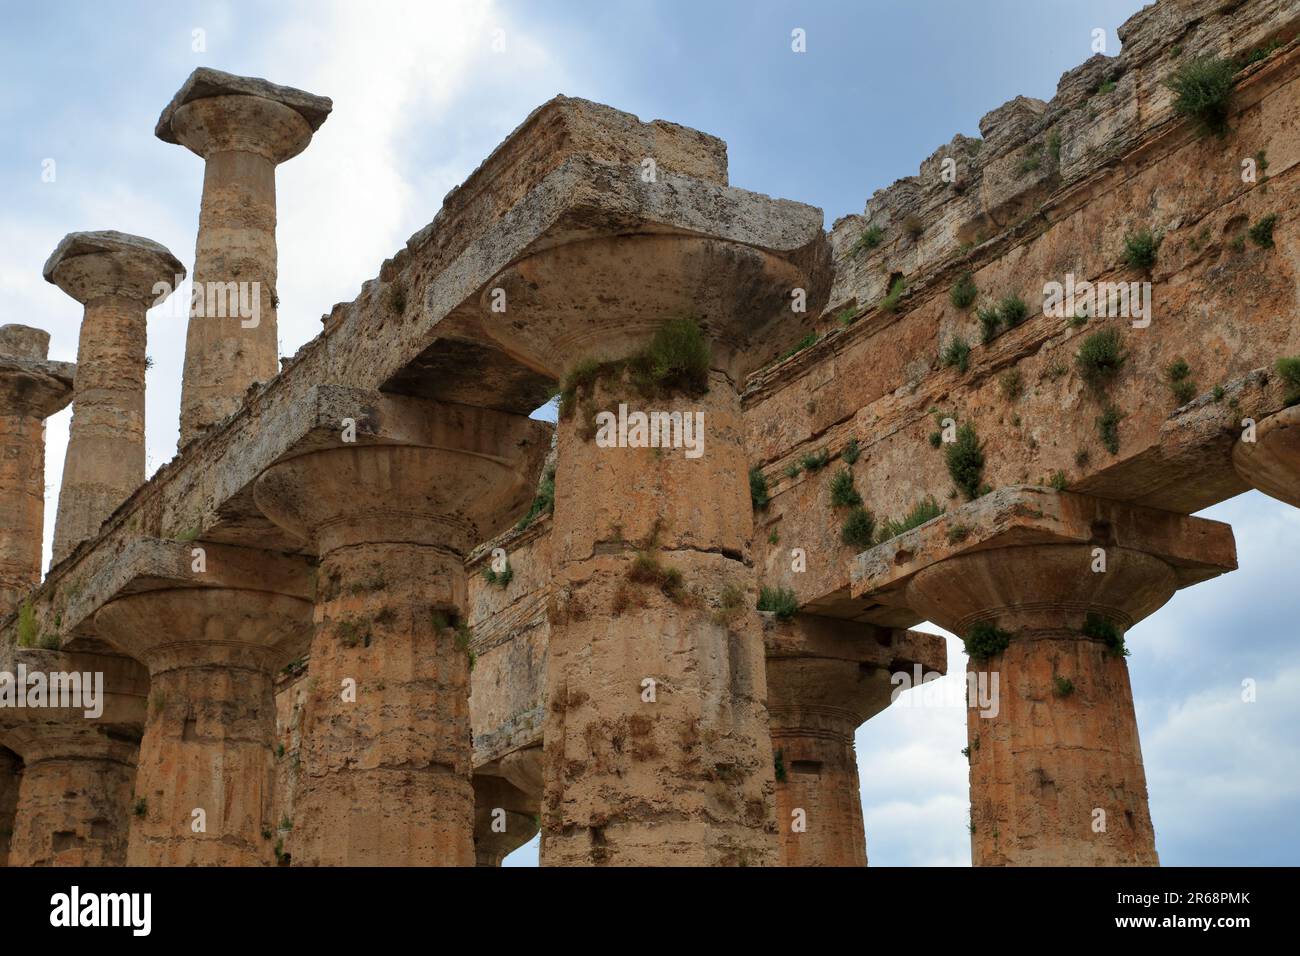 Greek temples of the ancient Greek city Paestum in Italy. Temple of Poseidon (Second Temple of Hera). Templi di paestum. Ancient Greek architecture. Stock Photo